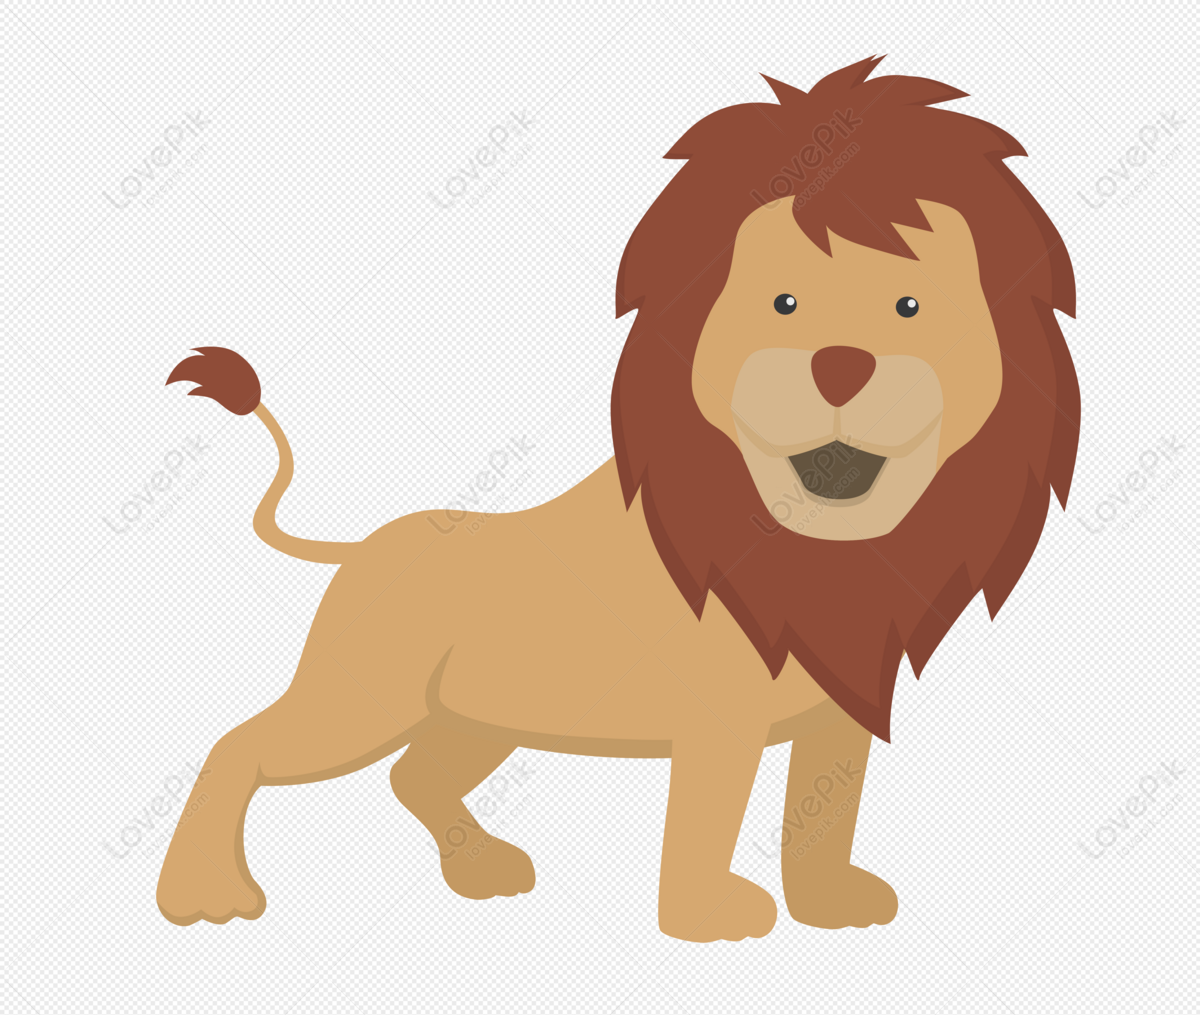 Lion Png Free Download And Clipart Image For Free Download - Lovepik |  400207593